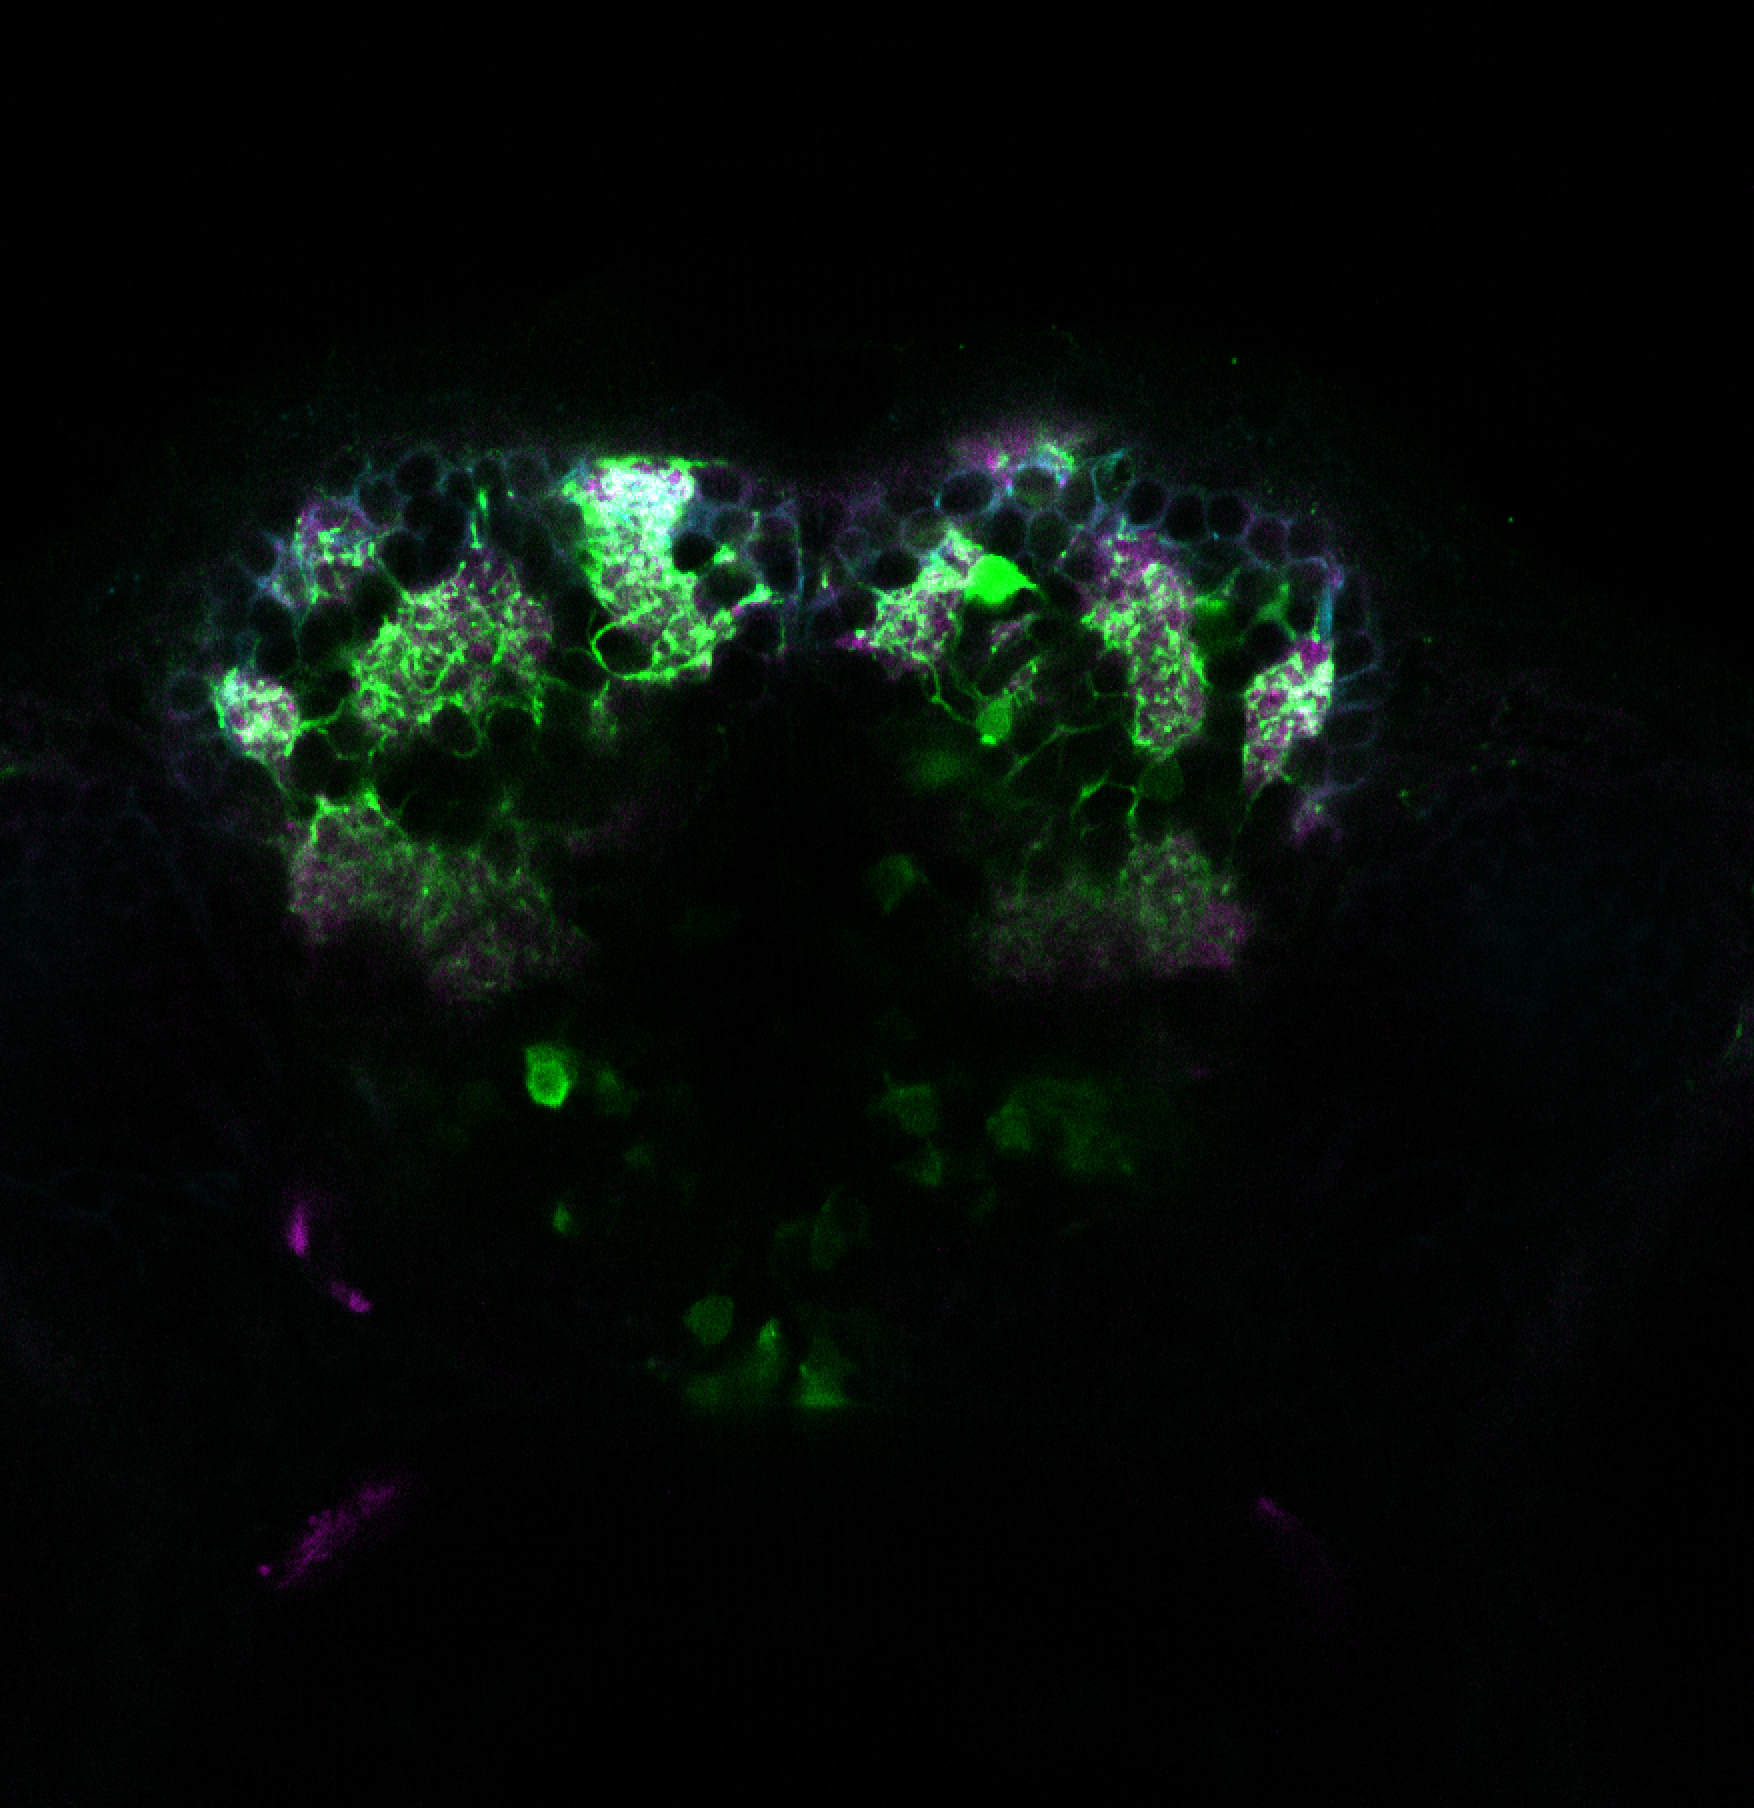 Olfactory bulb Tg(1.4dlx5a-dlx6a:GFP)ot1 labelled with GFP, tubulin and sv2